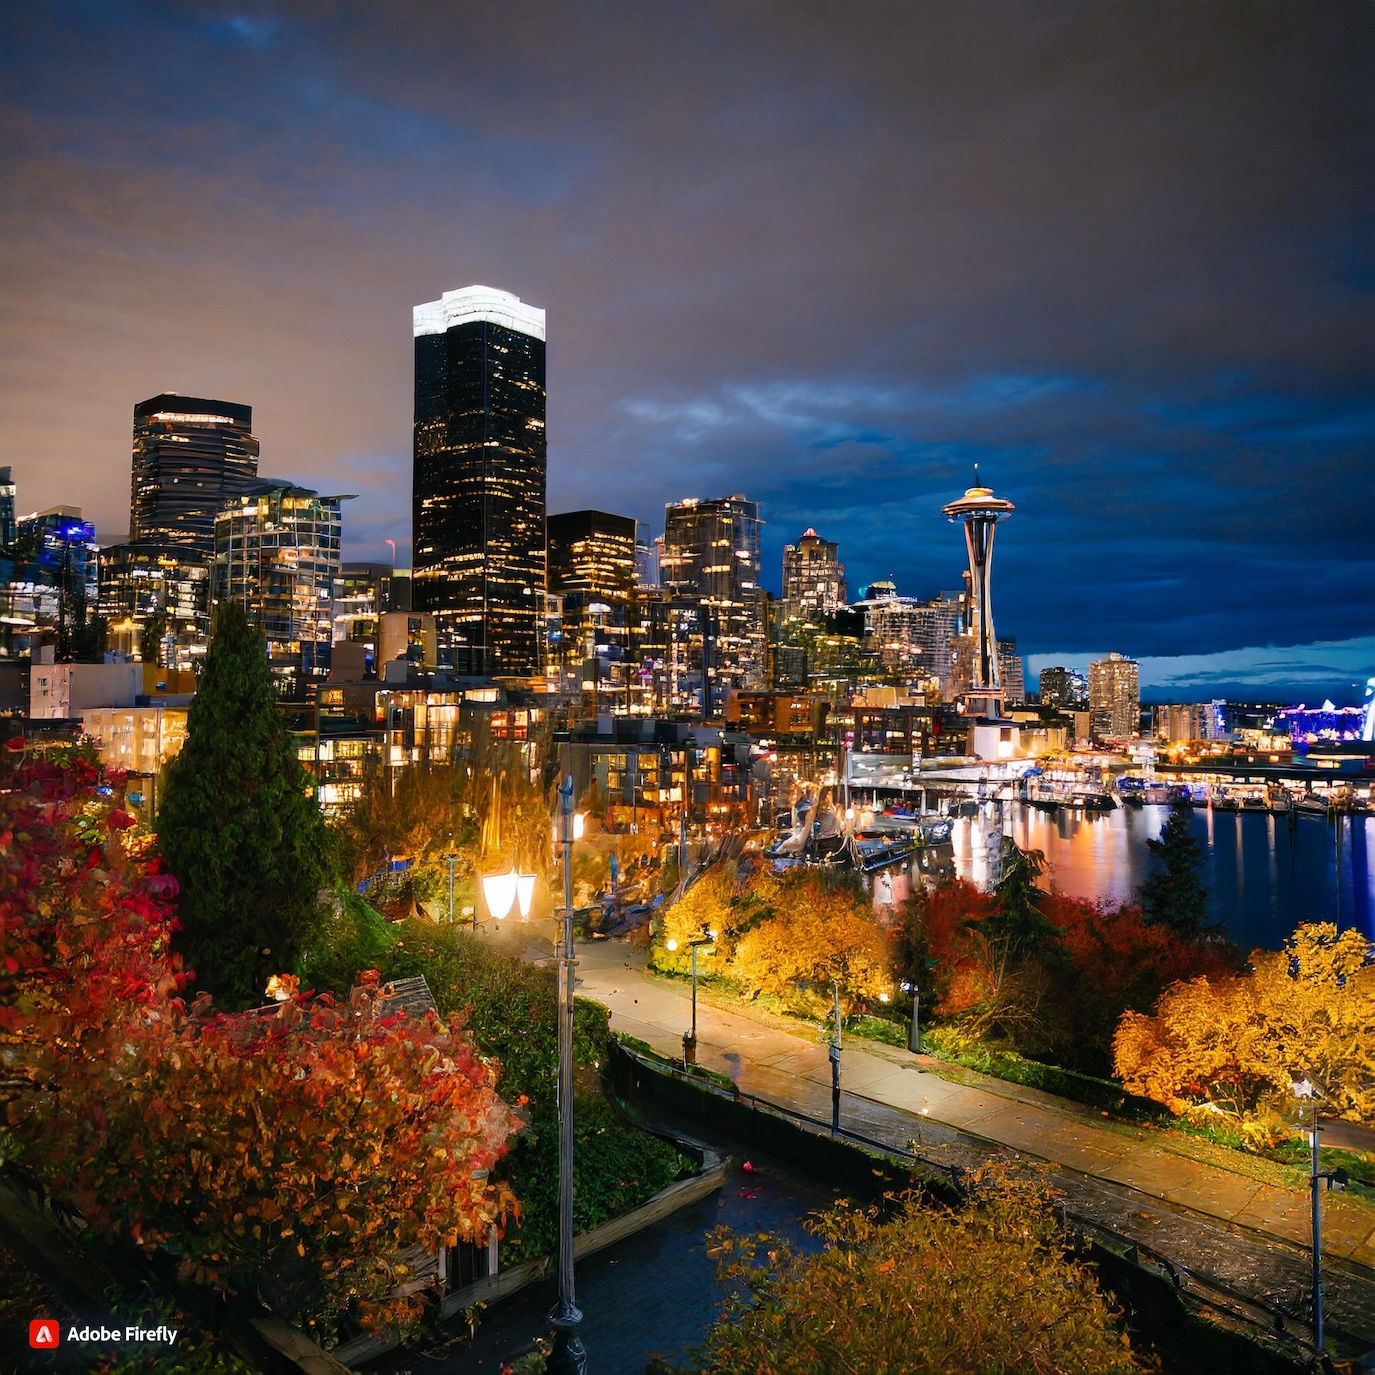  Firefly Night time at Pike Place Market in Seattle, Washington during the fall 4108